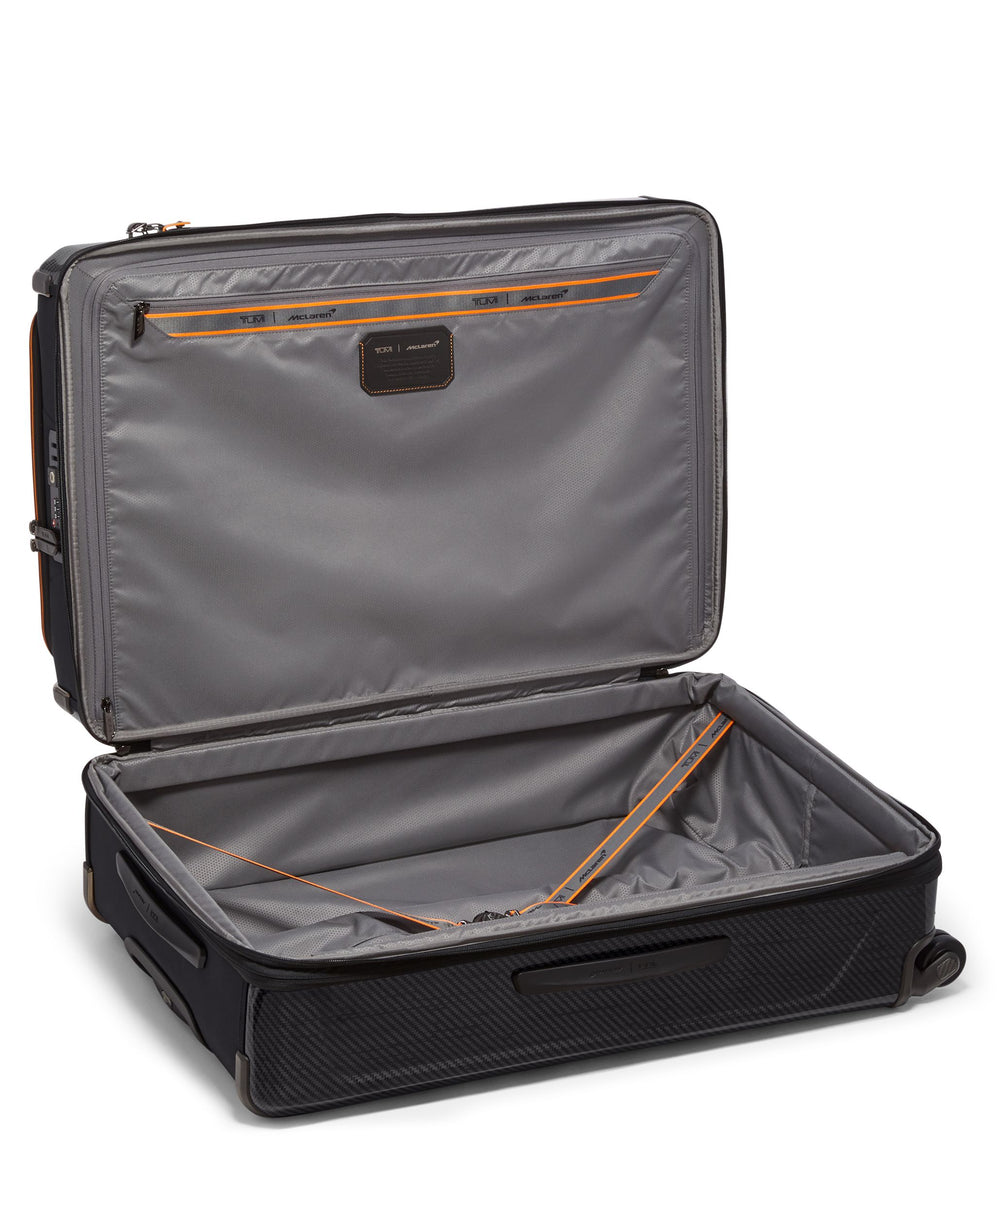 Aero Extended Trip Packing Case